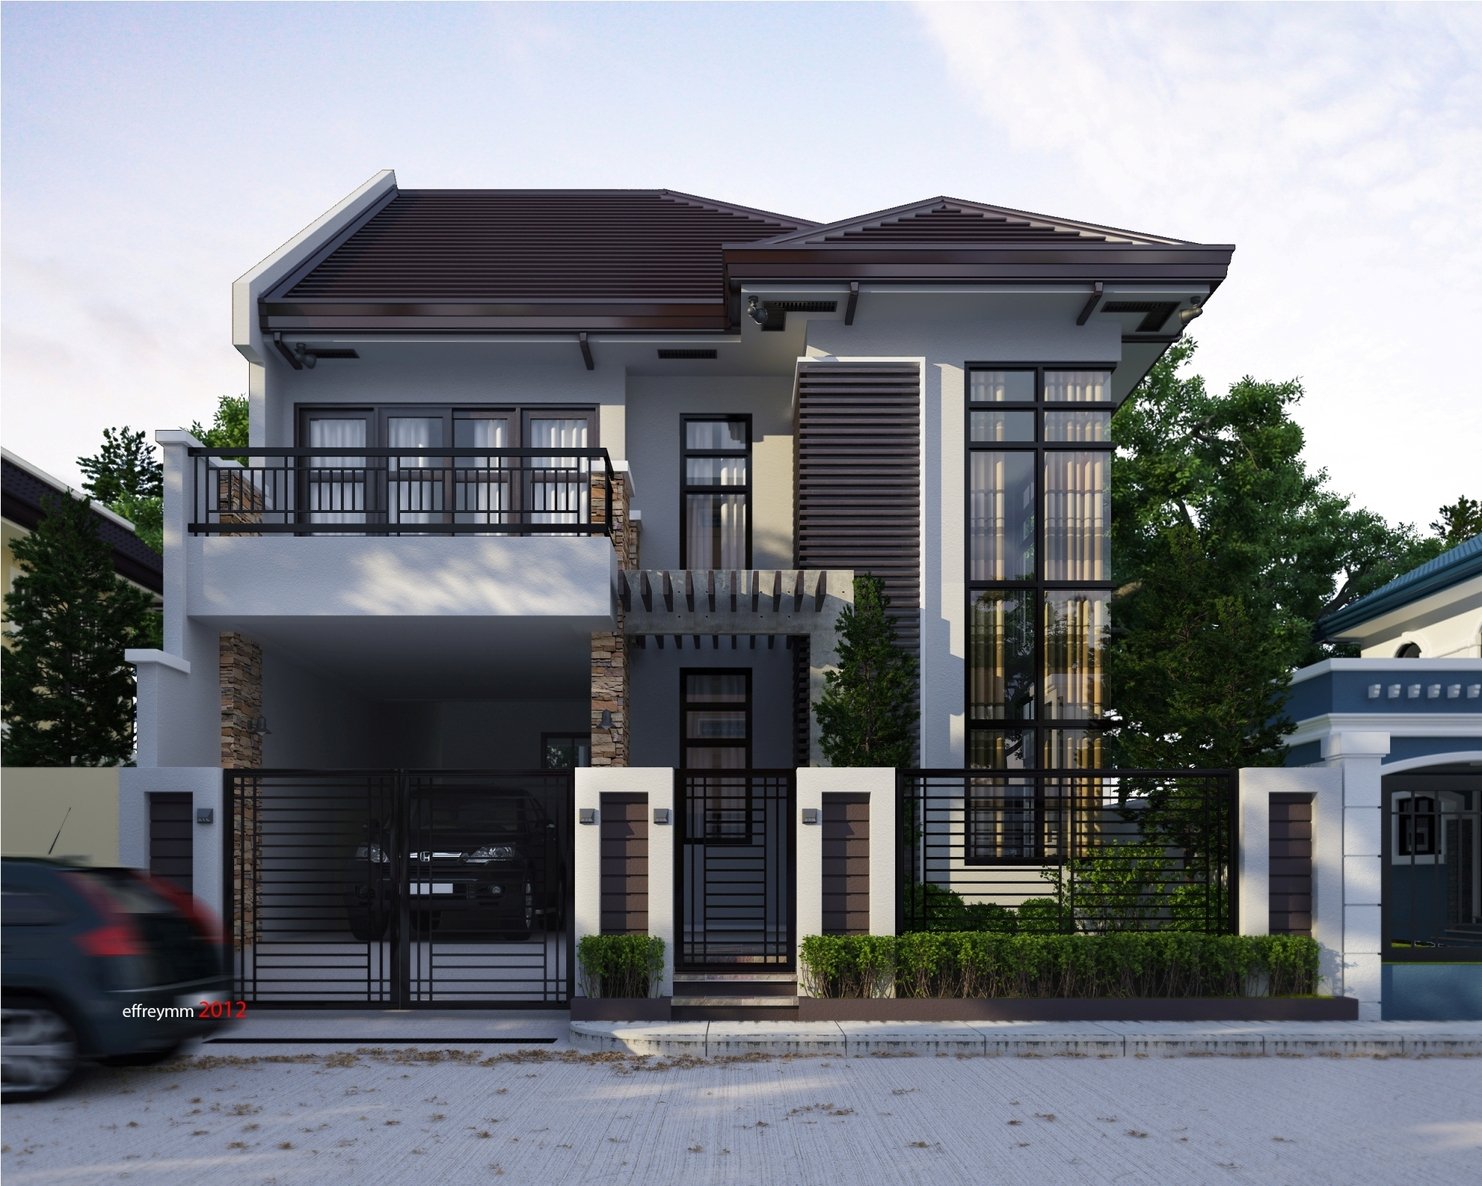 2 Storey House Design With Rooftop Philippines - House Storey